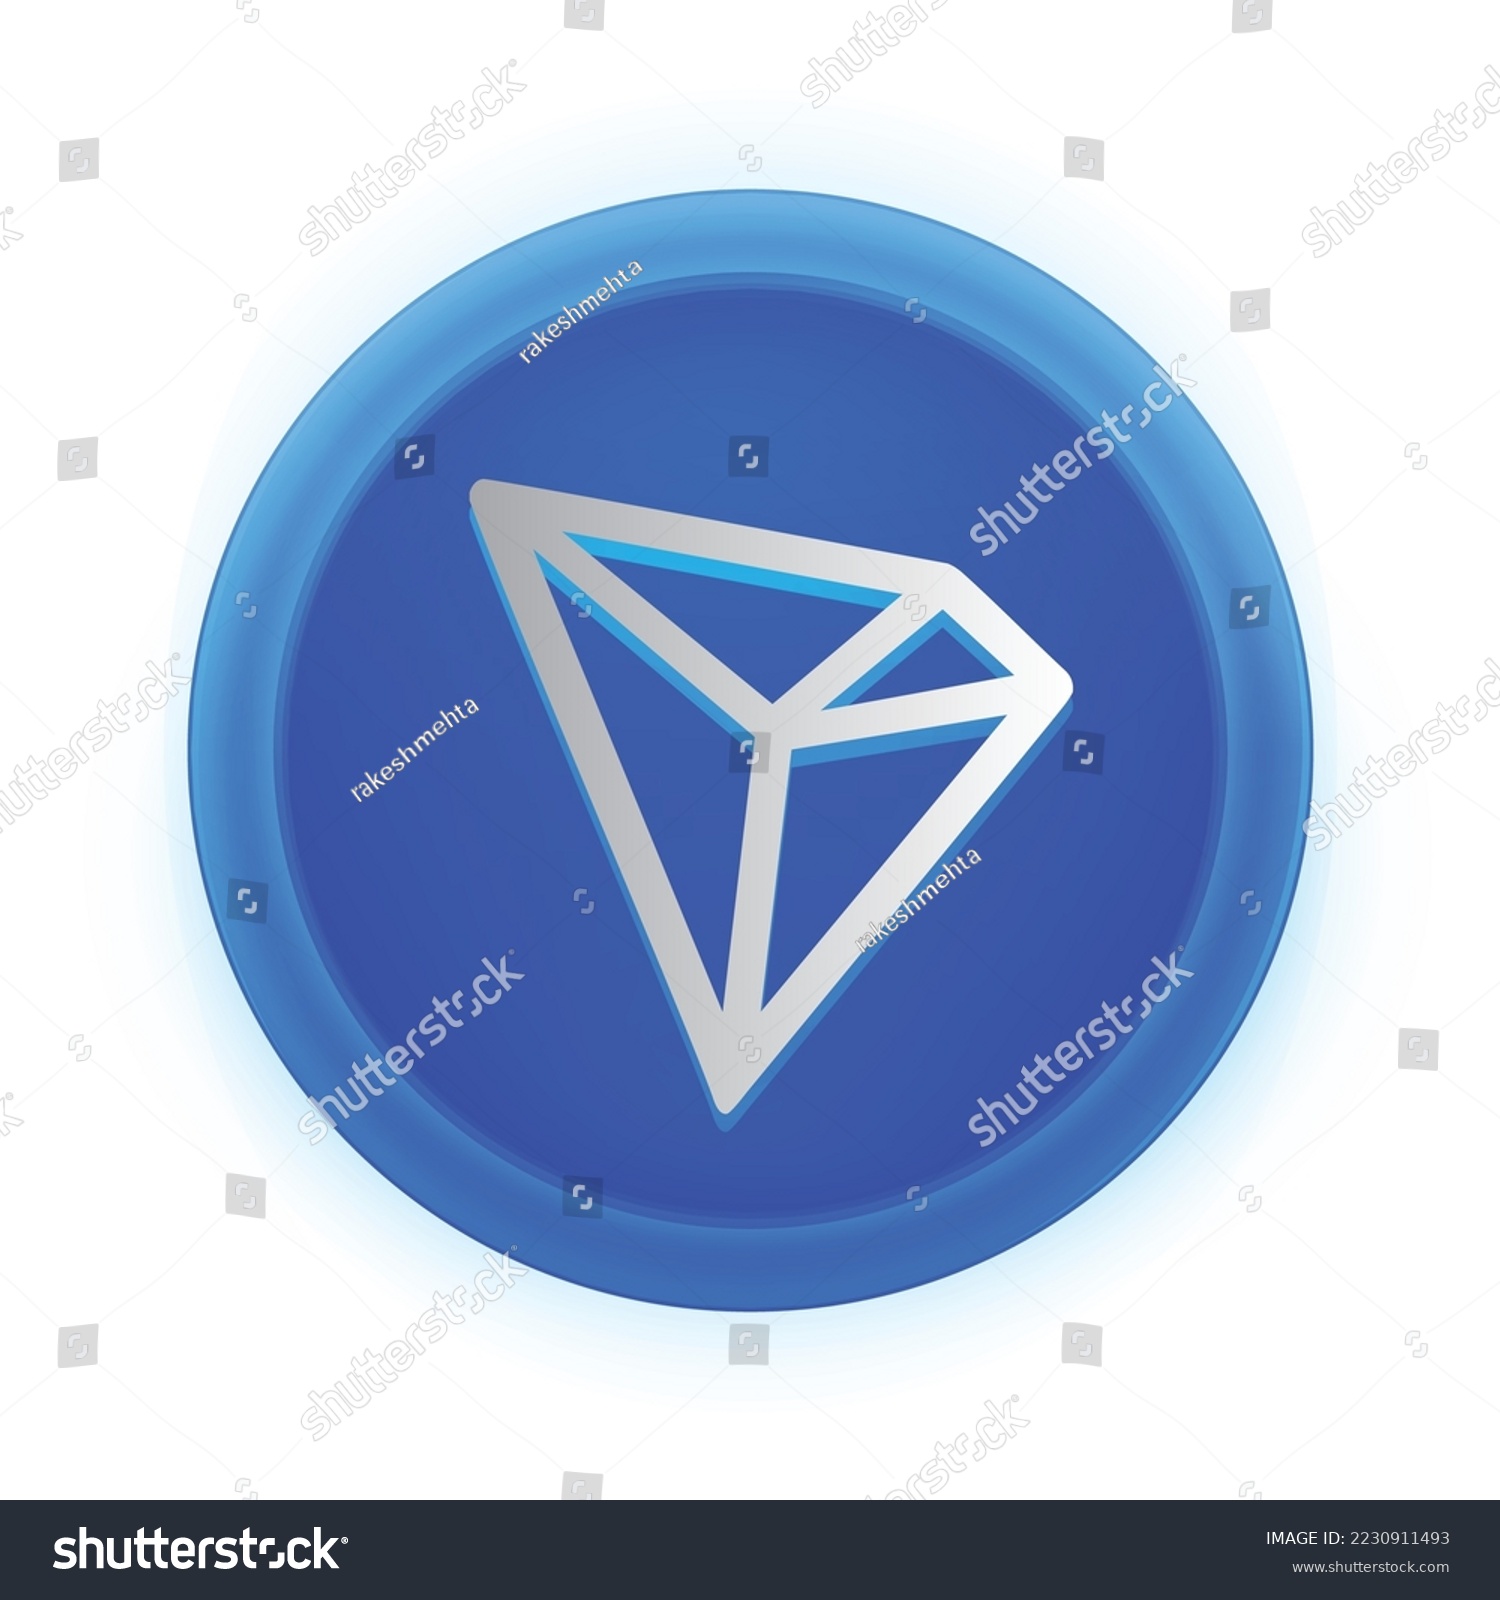 SVG of Tron (TRX) crypto logo isolated on white background. TRX Cryptocurrency coin token vector svg